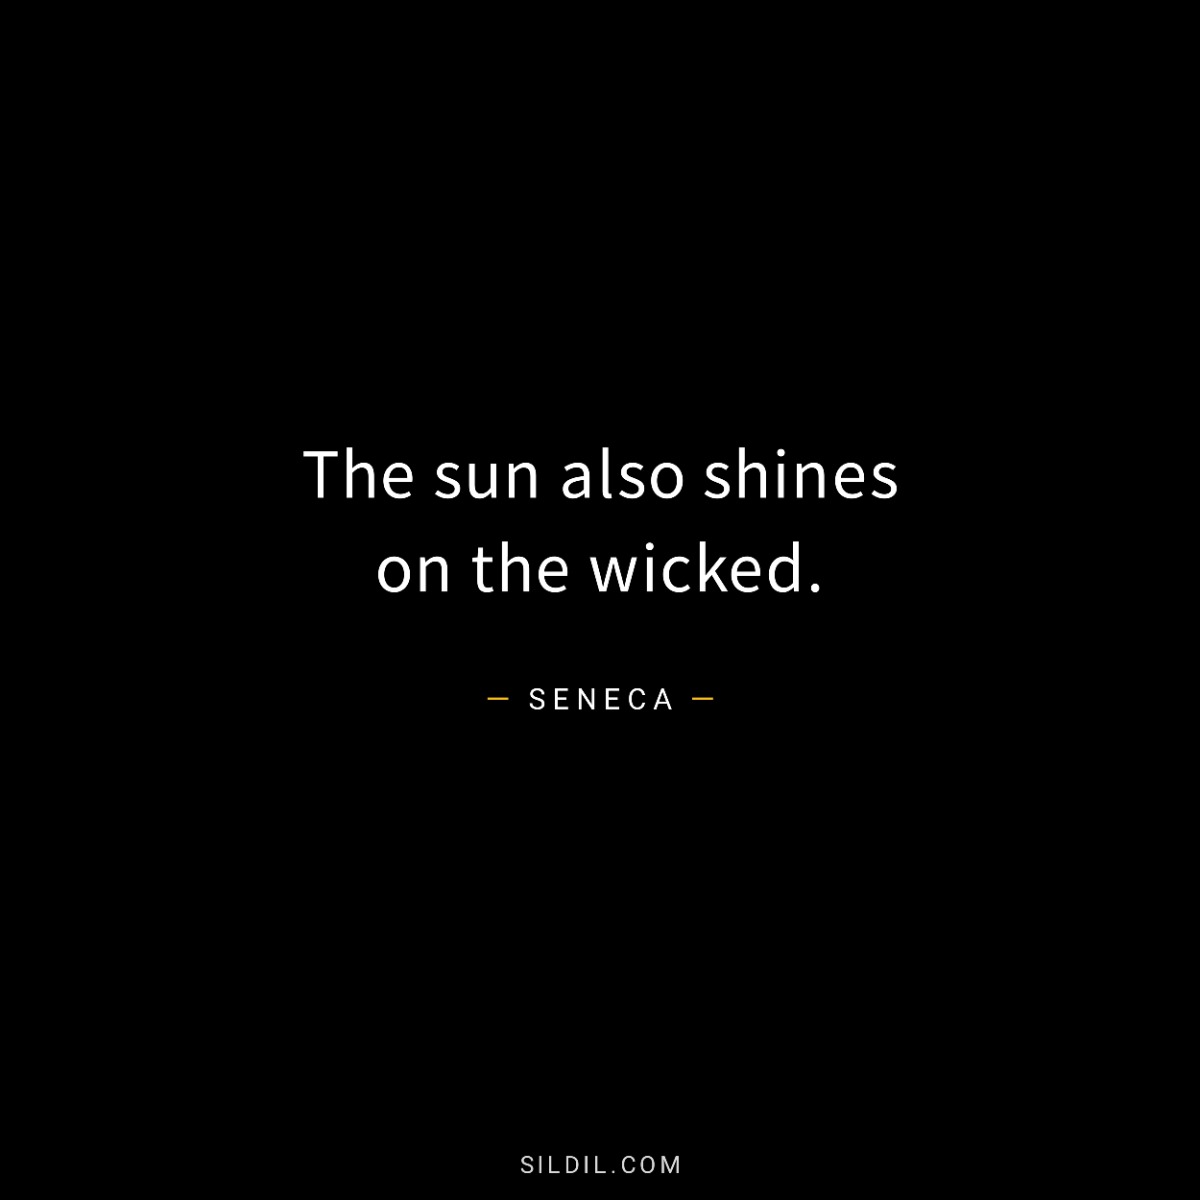 The sun also shines on the wicked.